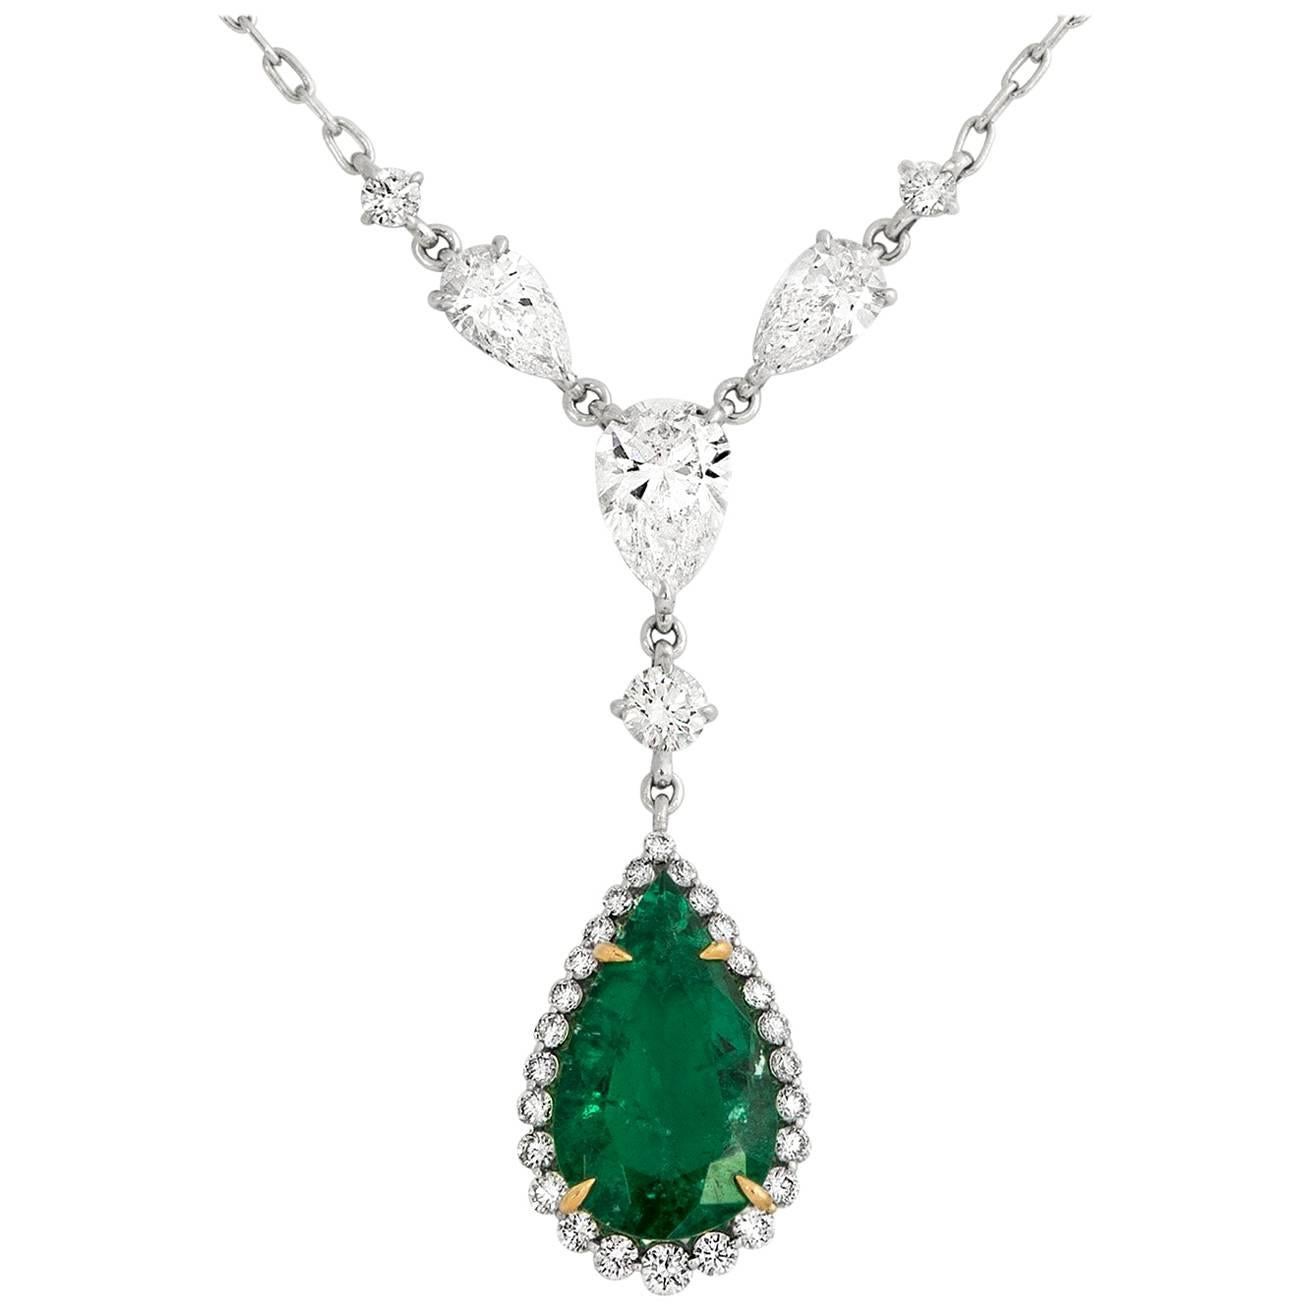  Cushla Whiting GIA cert. 1.89 ct Muzo Emerald and Diamond Pear Pendant Necklace For Sale